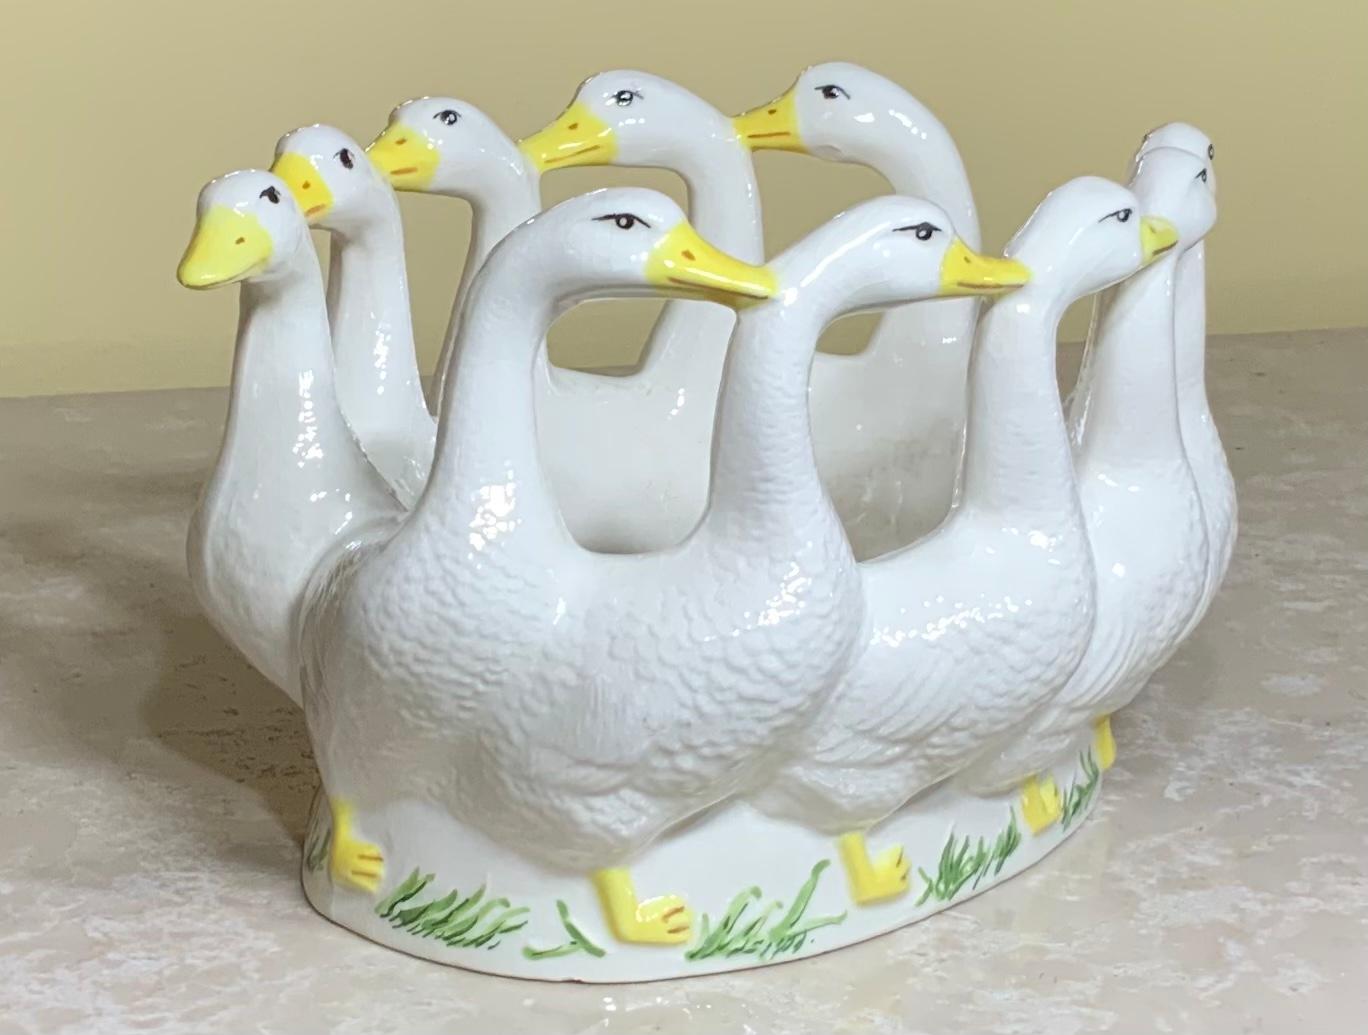 Beautiful candy dish made of porcelain of ducks back to back each other in a circle, vive details on a Snow White color yellow and green some fading in the Center due to age.
Sign in the bottom CT.